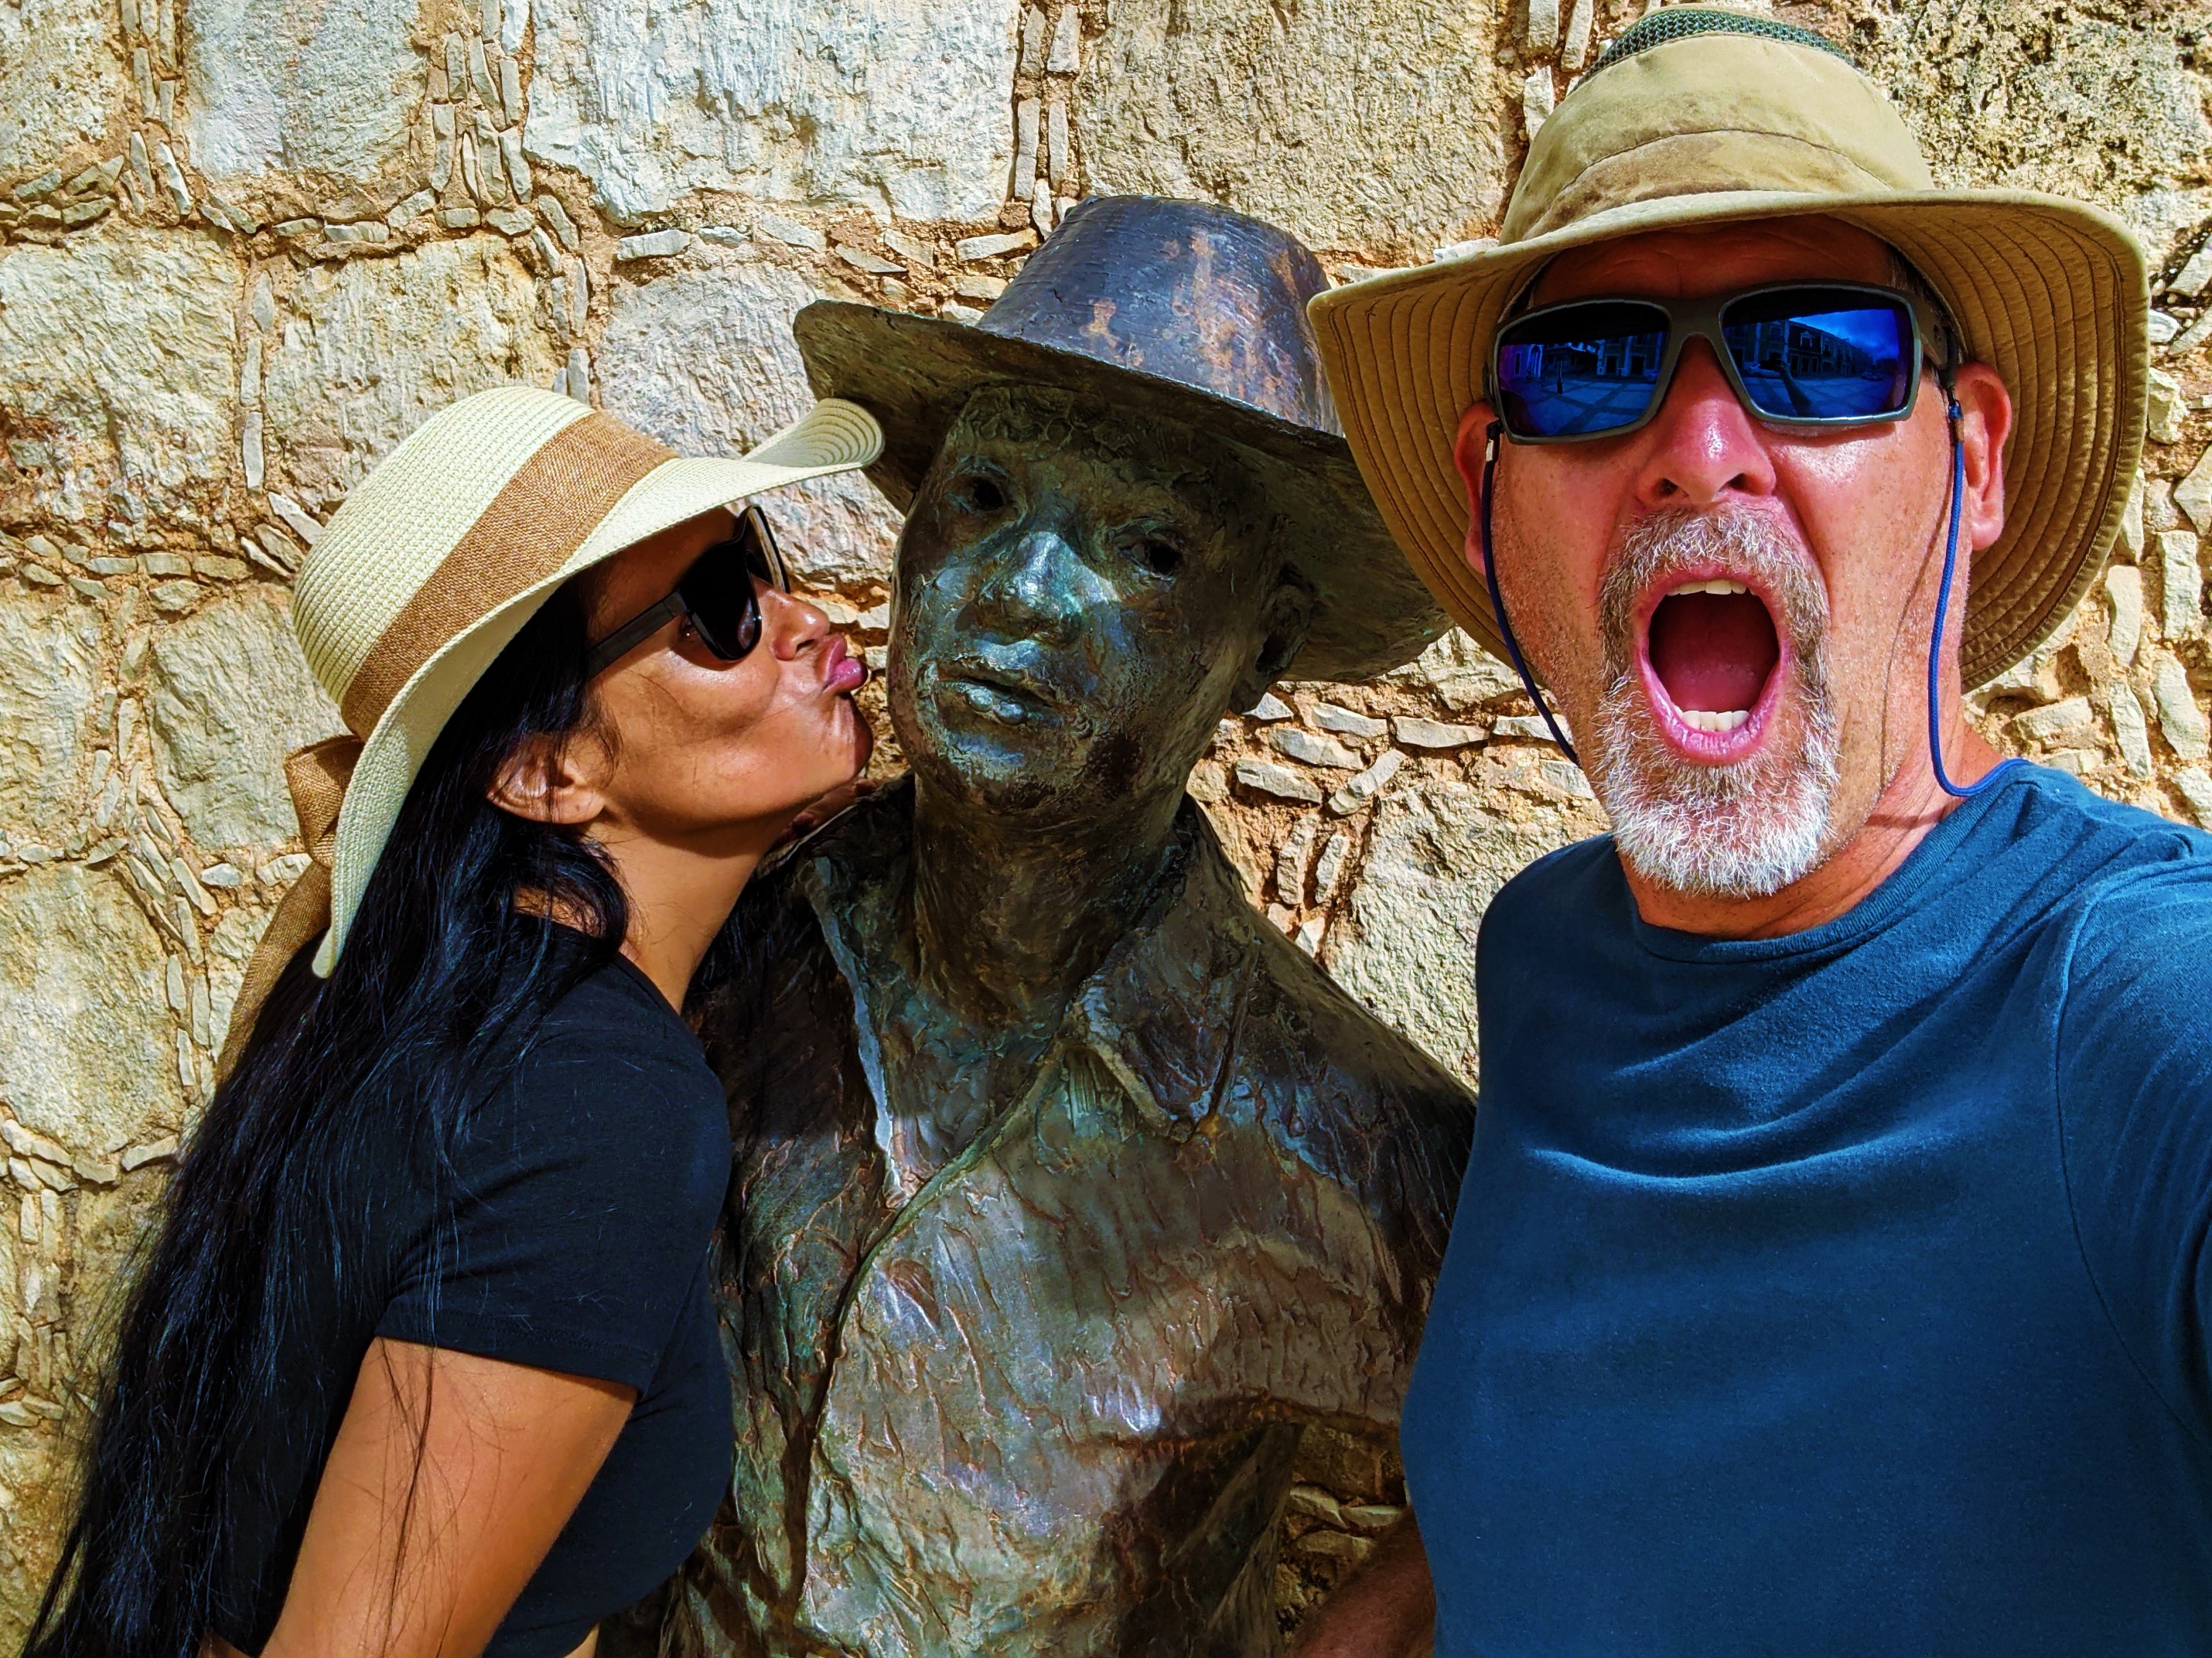 Check out how much fun we had in Campeche, Mexico